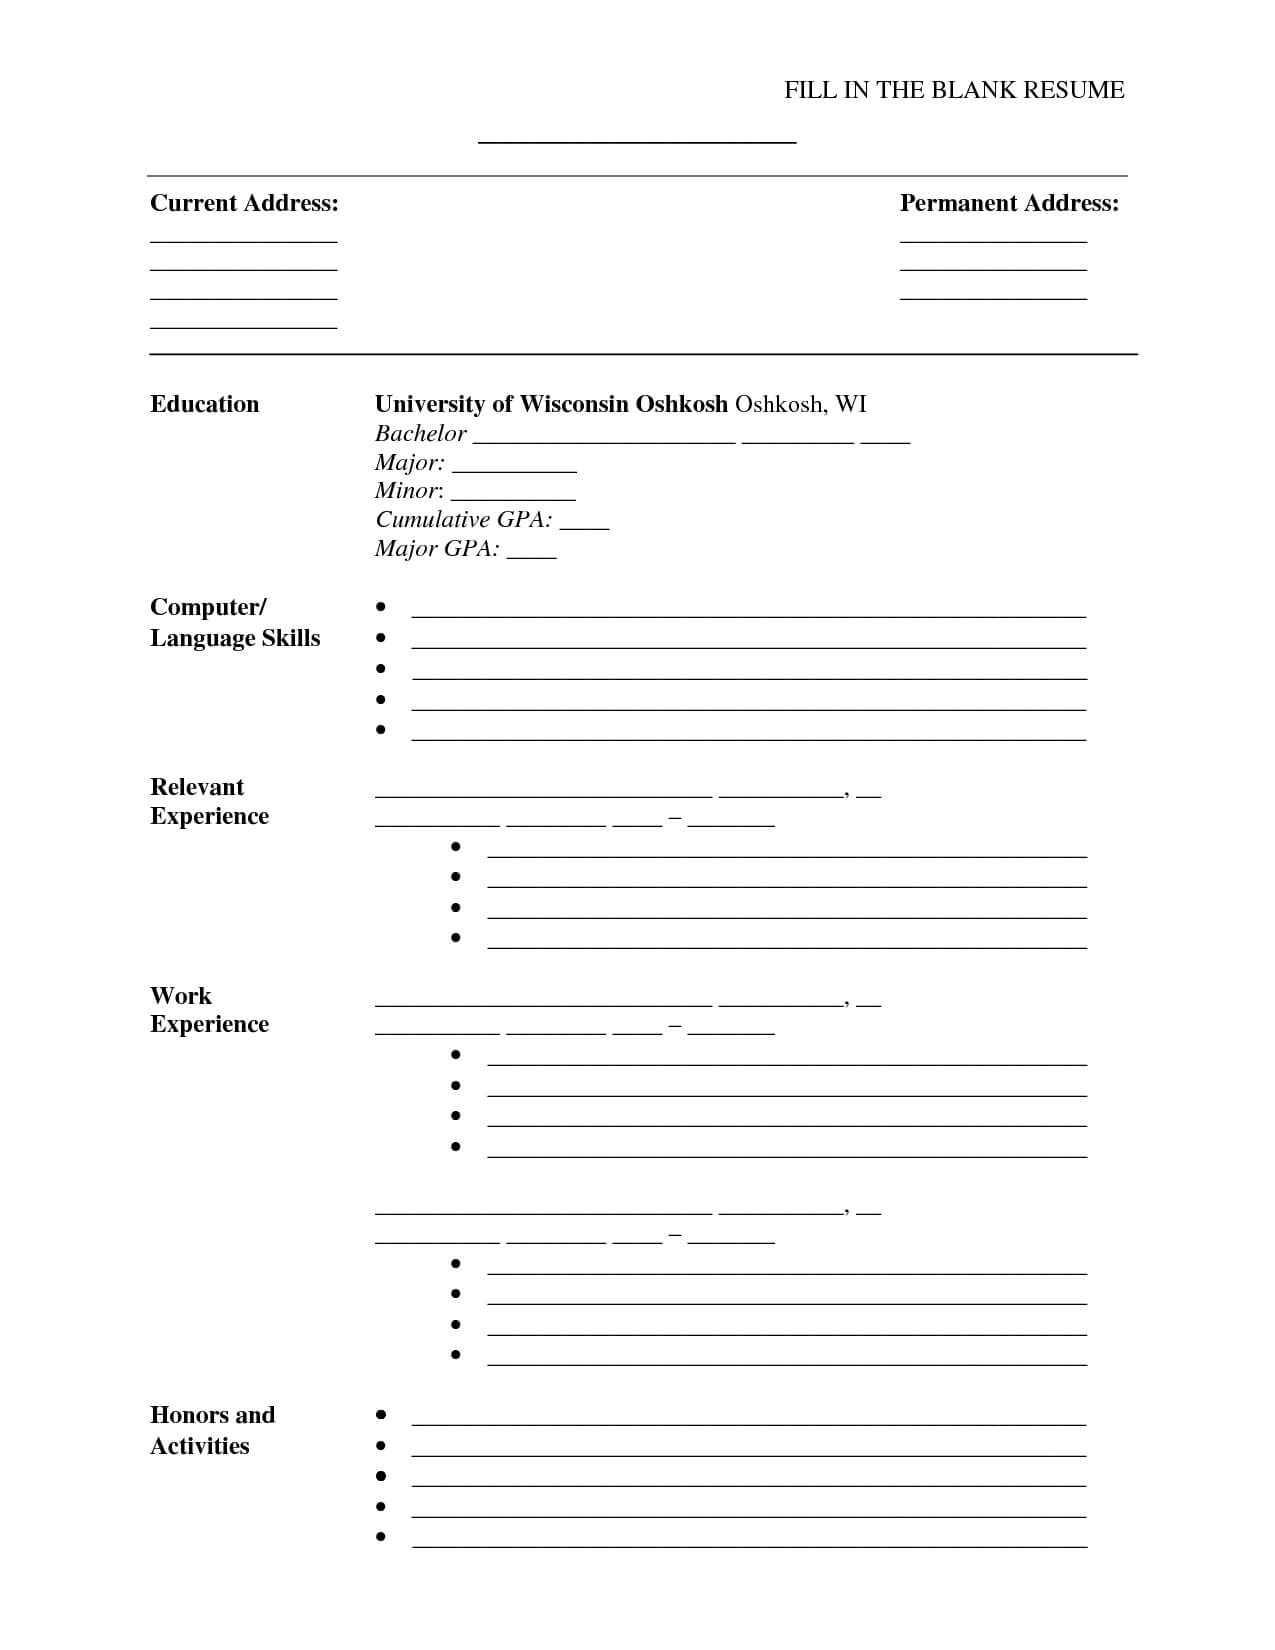 a-cv-template-to-fill-in-free-printable-resume-free-regarding-blank